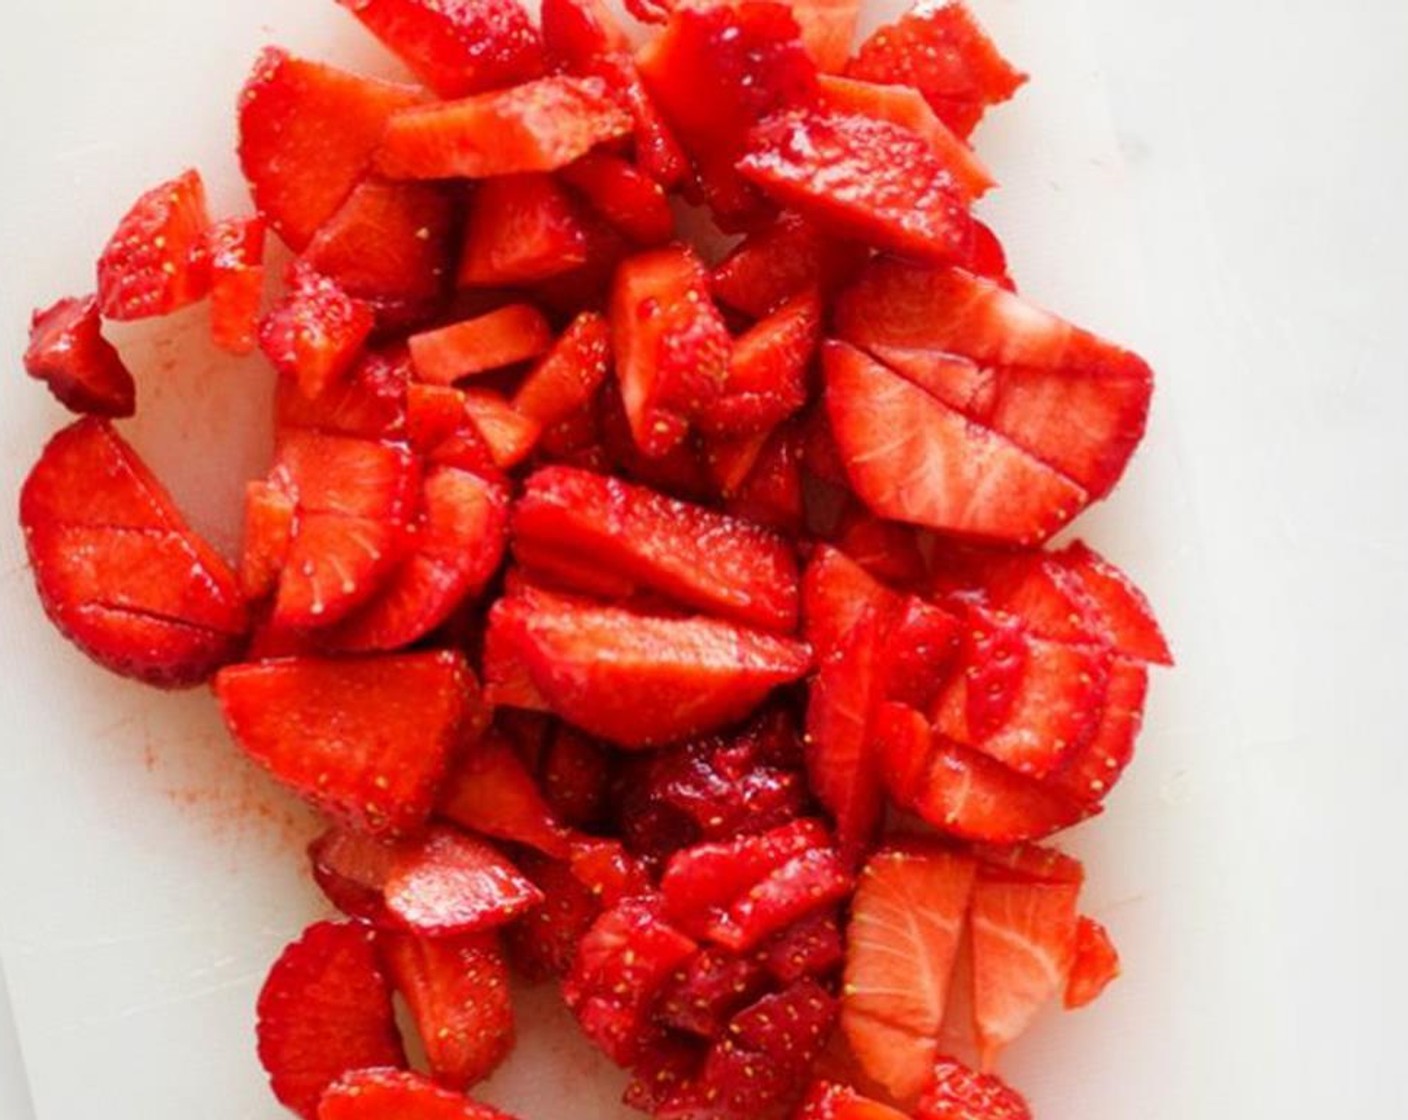 step 2 In a small bowl, mix together Fresh Strawberry (1/2 cup), Cream Cheese (1/4 cup), Granulated Sugar (1/2 Tbsp), and Salt (to taste). Gently spoon the mixture evenly into the bread pockets, being careful not to poke a hole in the bread.